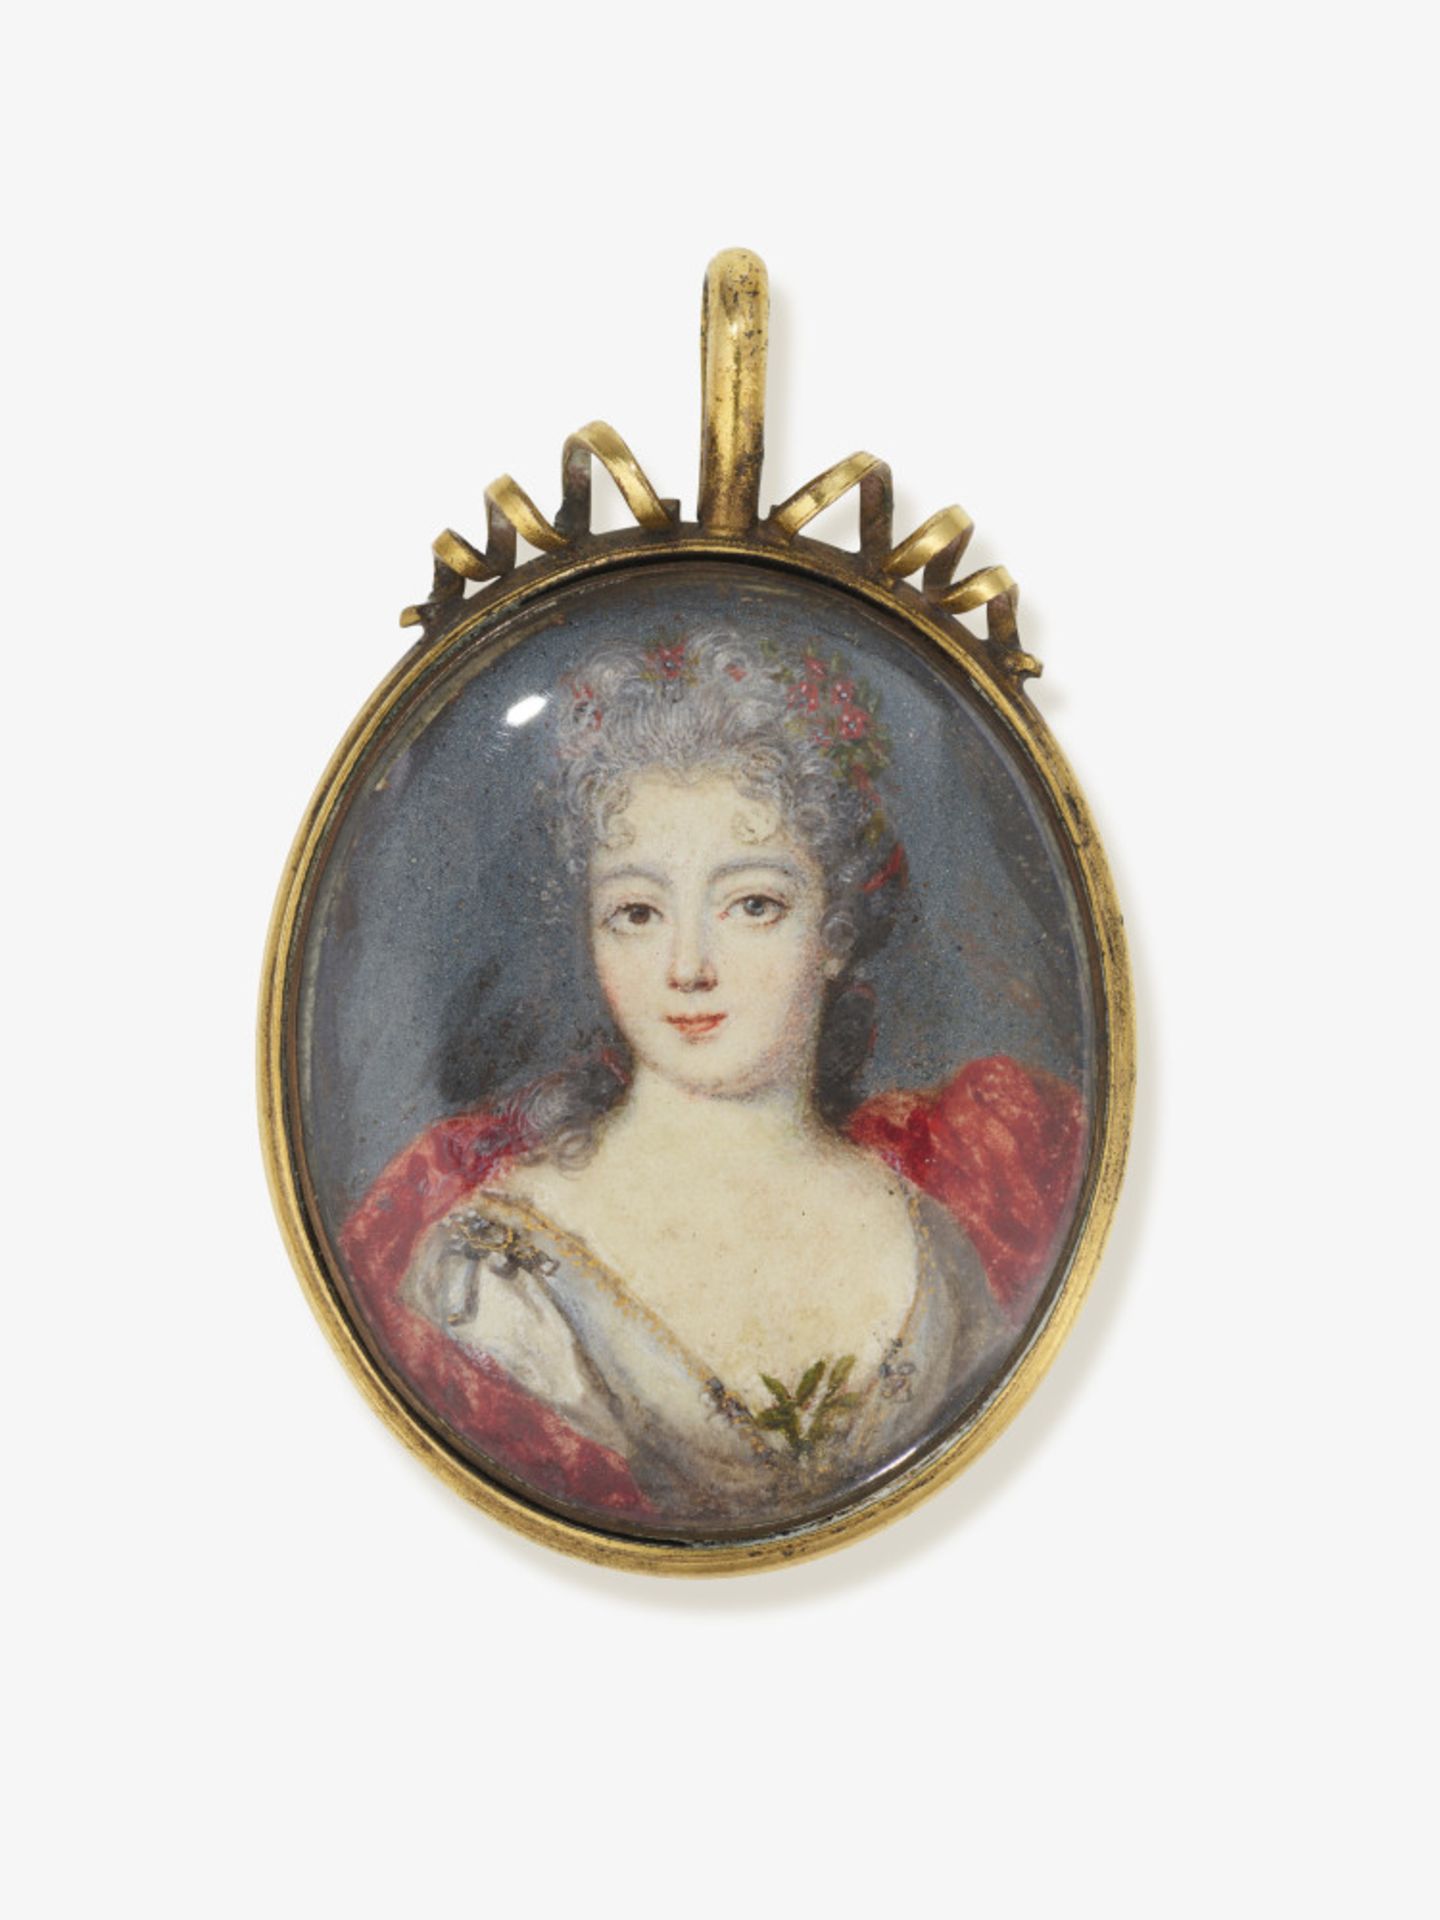 A pendant with a portrait miniature, half-length portrait of a young lady - Probably Germany, late 1